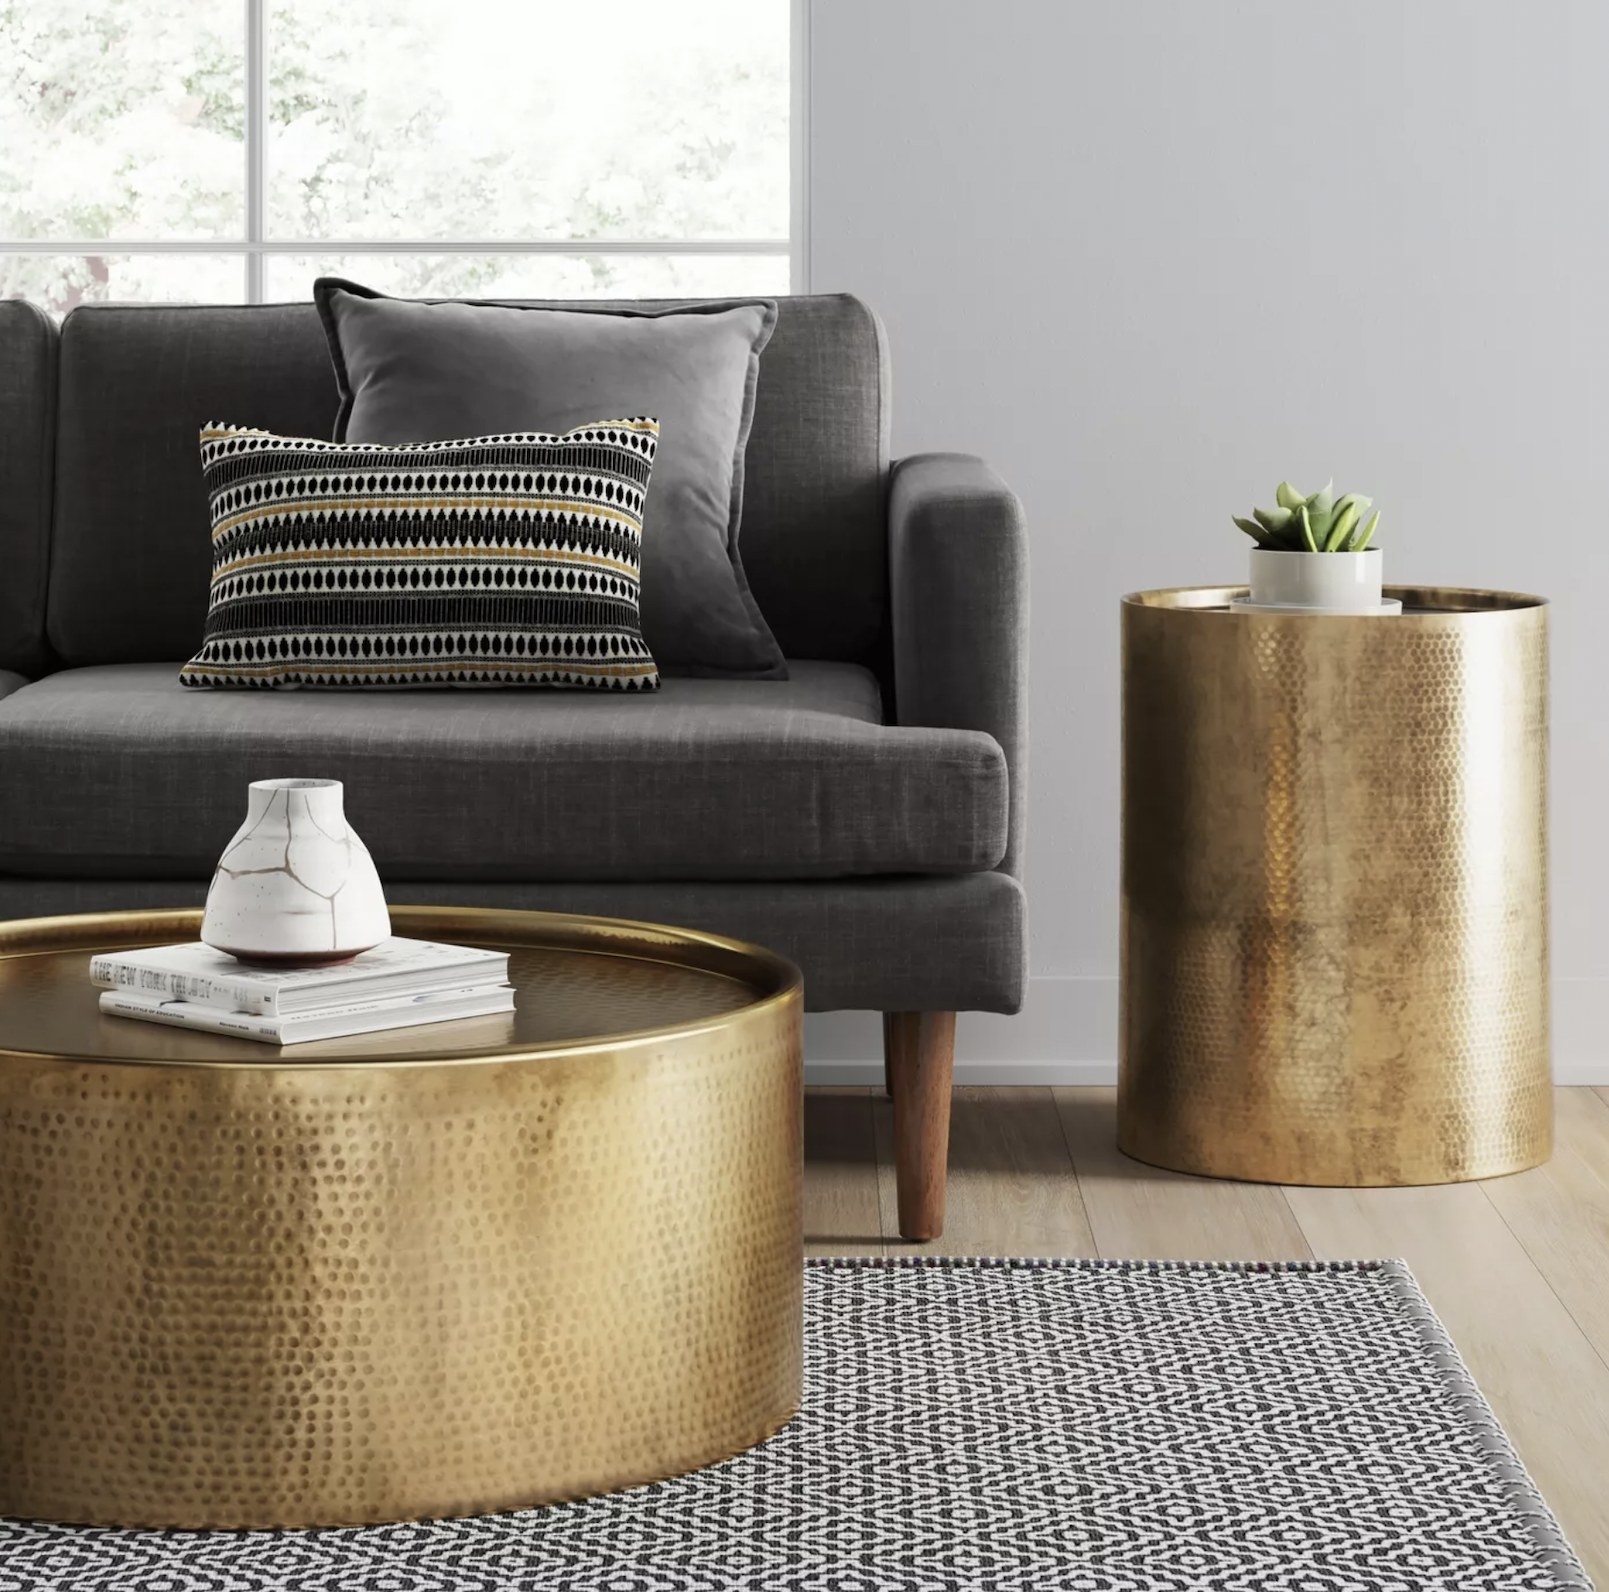 The round hammered gold accent table